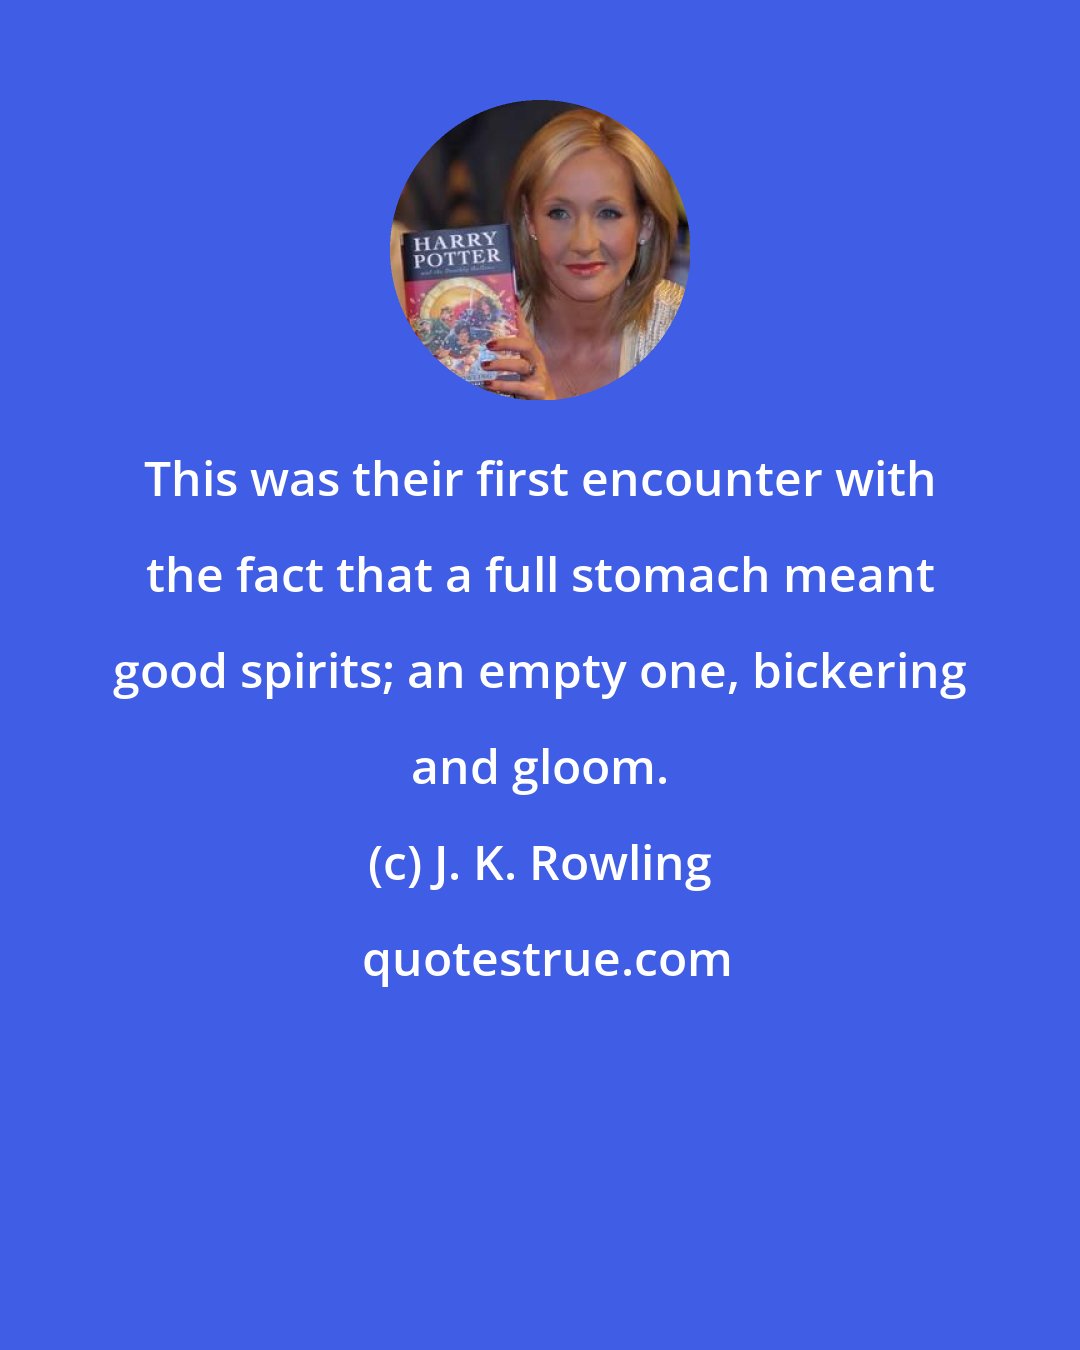 J. K. Rowling: This was their first encounter with the fact that a full stomach meant good spirits; an empty one, bickering and gloom.